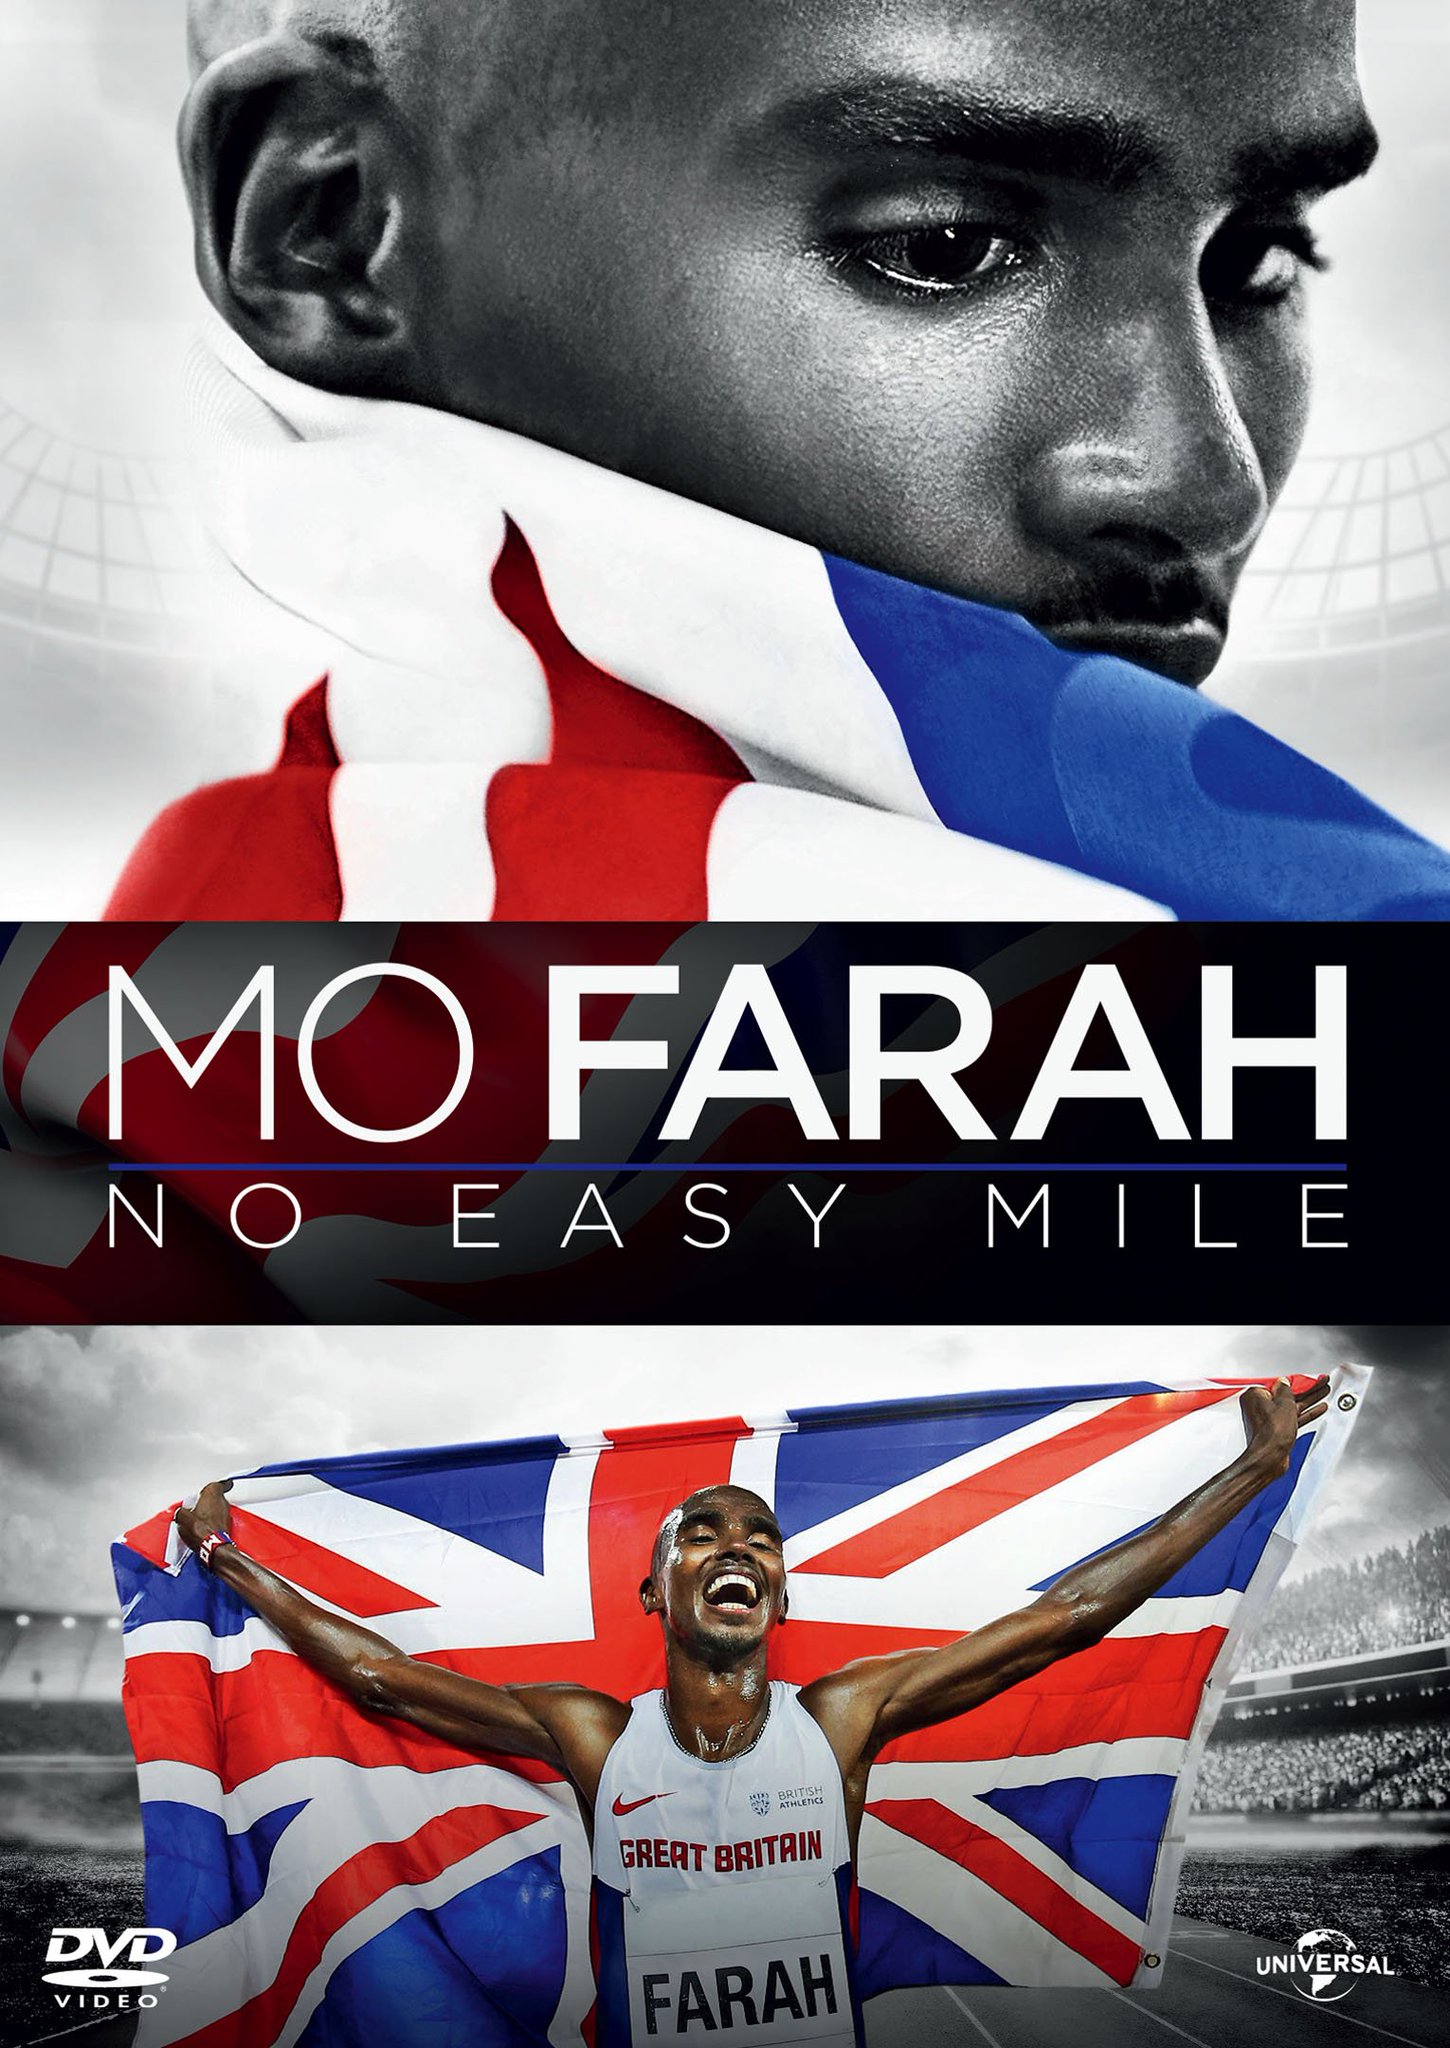 Sir Mo Farah On Twitter If You Havent Already Make Sure You Grab A